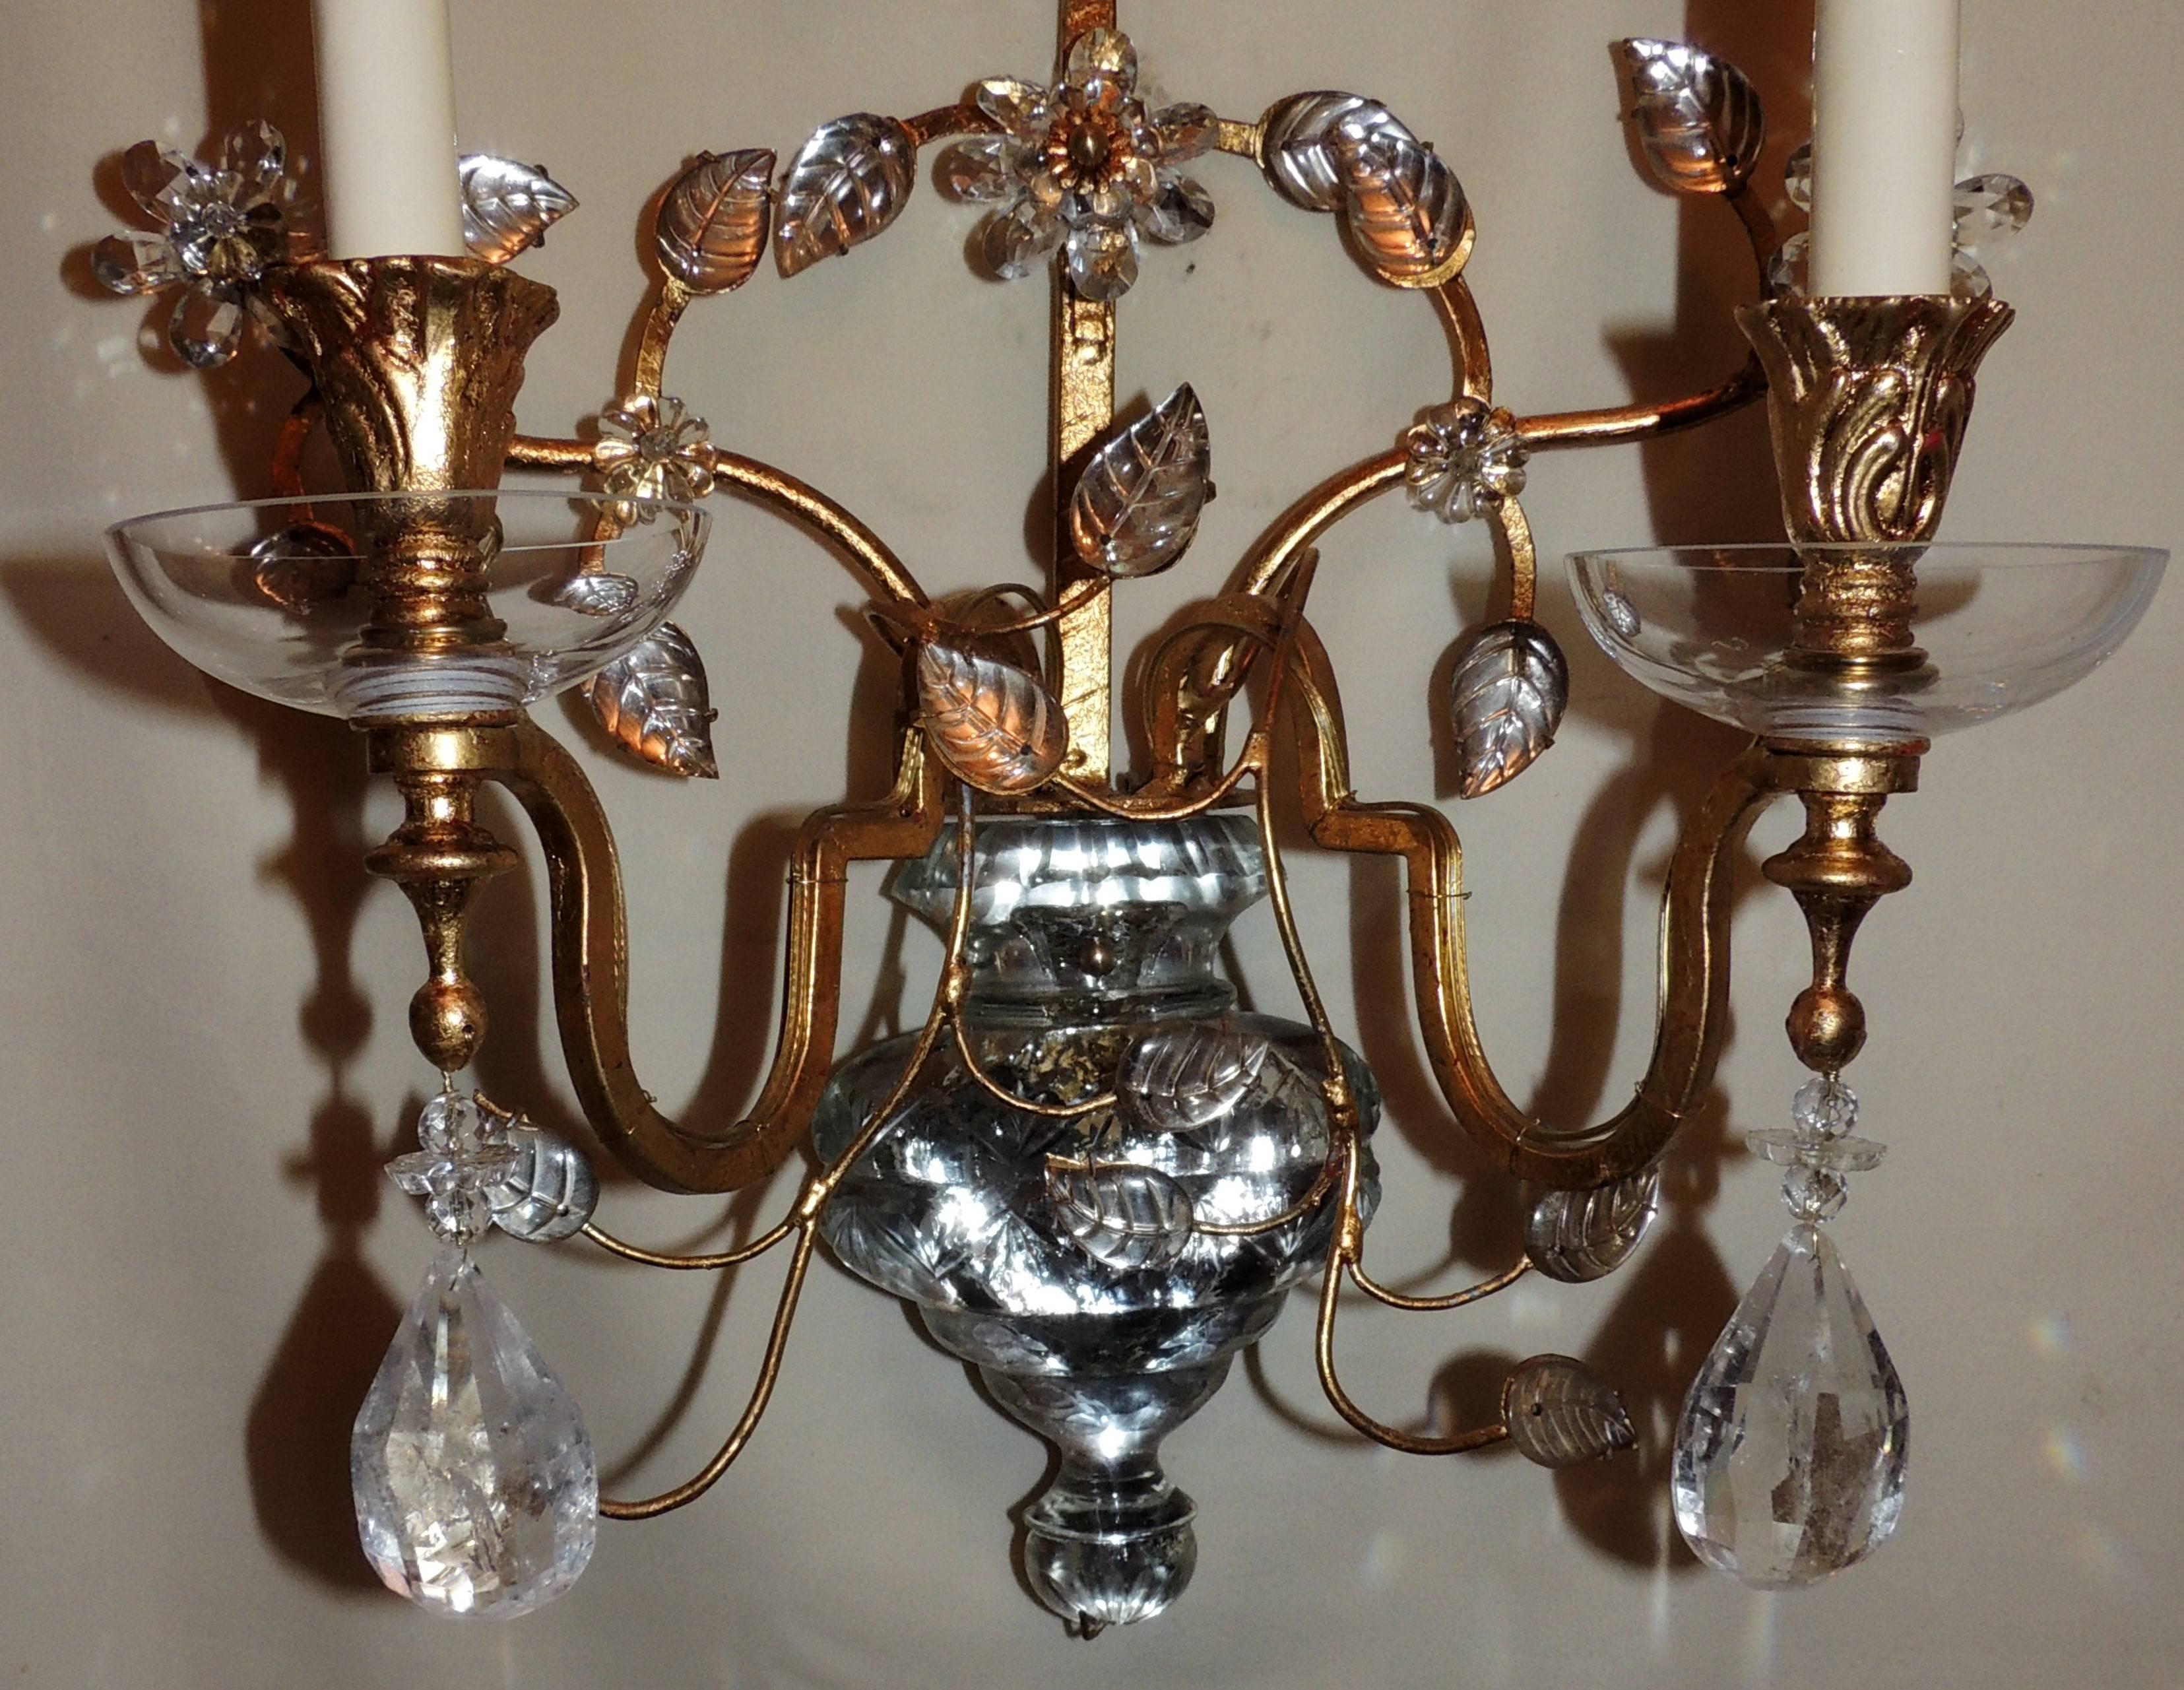 A wonderful pair of French rock crystal, gold gilt with glass urn center two-arm sconces in the manner of Baguès & Jansen.